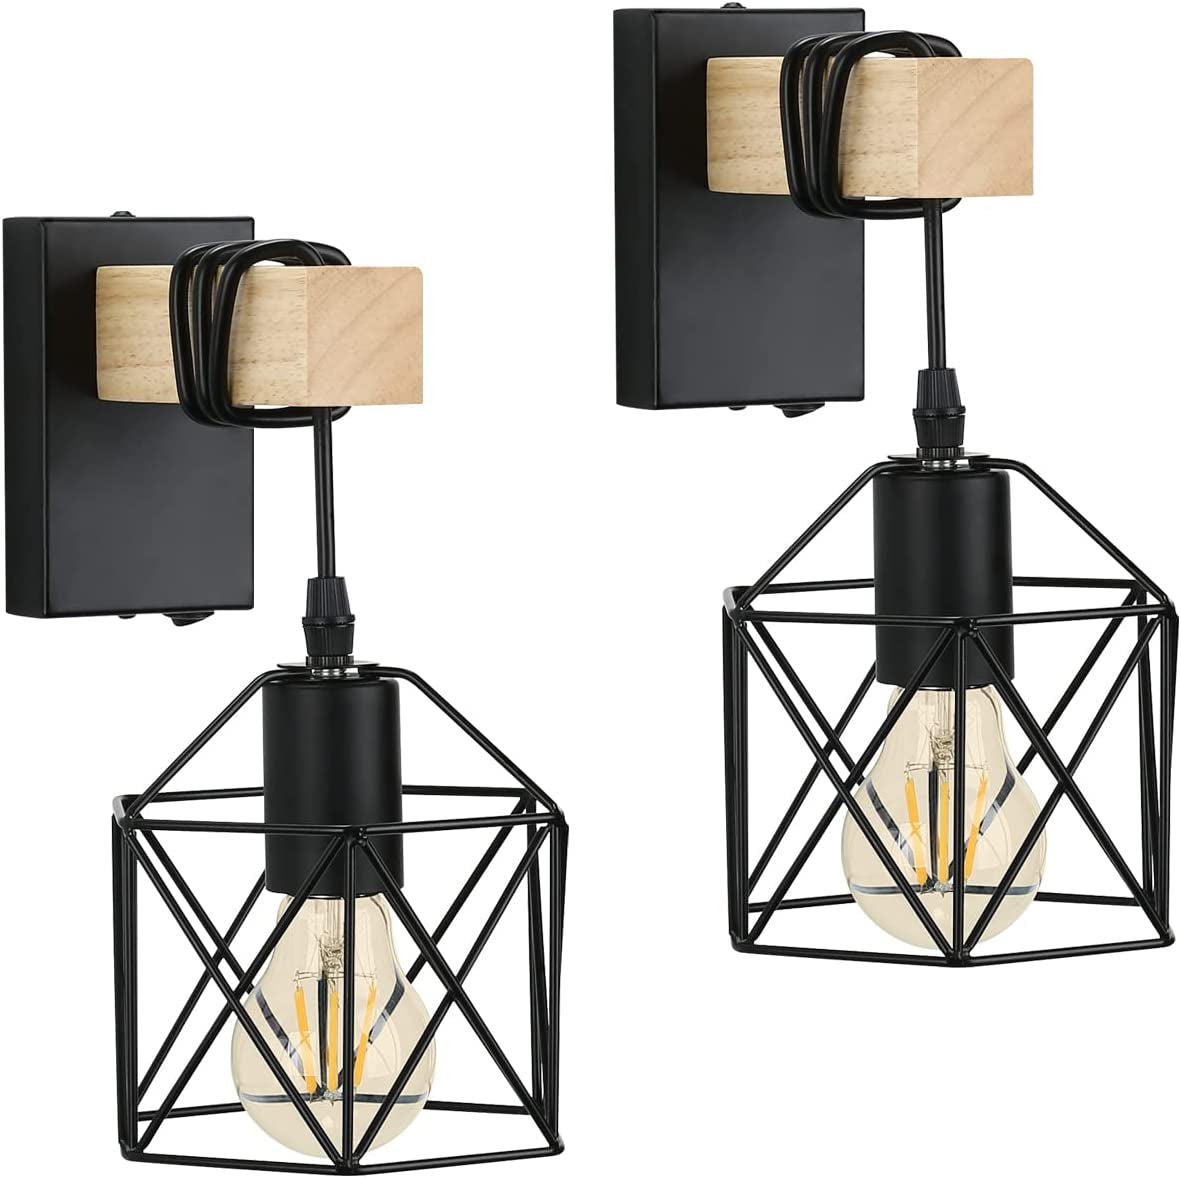 Industrial Wall Lights Indoor with Switch, Vintage Wooden Wall Lamp, E27 Black Cage Wall Lights, Wall Sconces Indoor for Farmhouse, Living Room, Bedroom, Hallway, Stairwell, Bar (2 Pack)